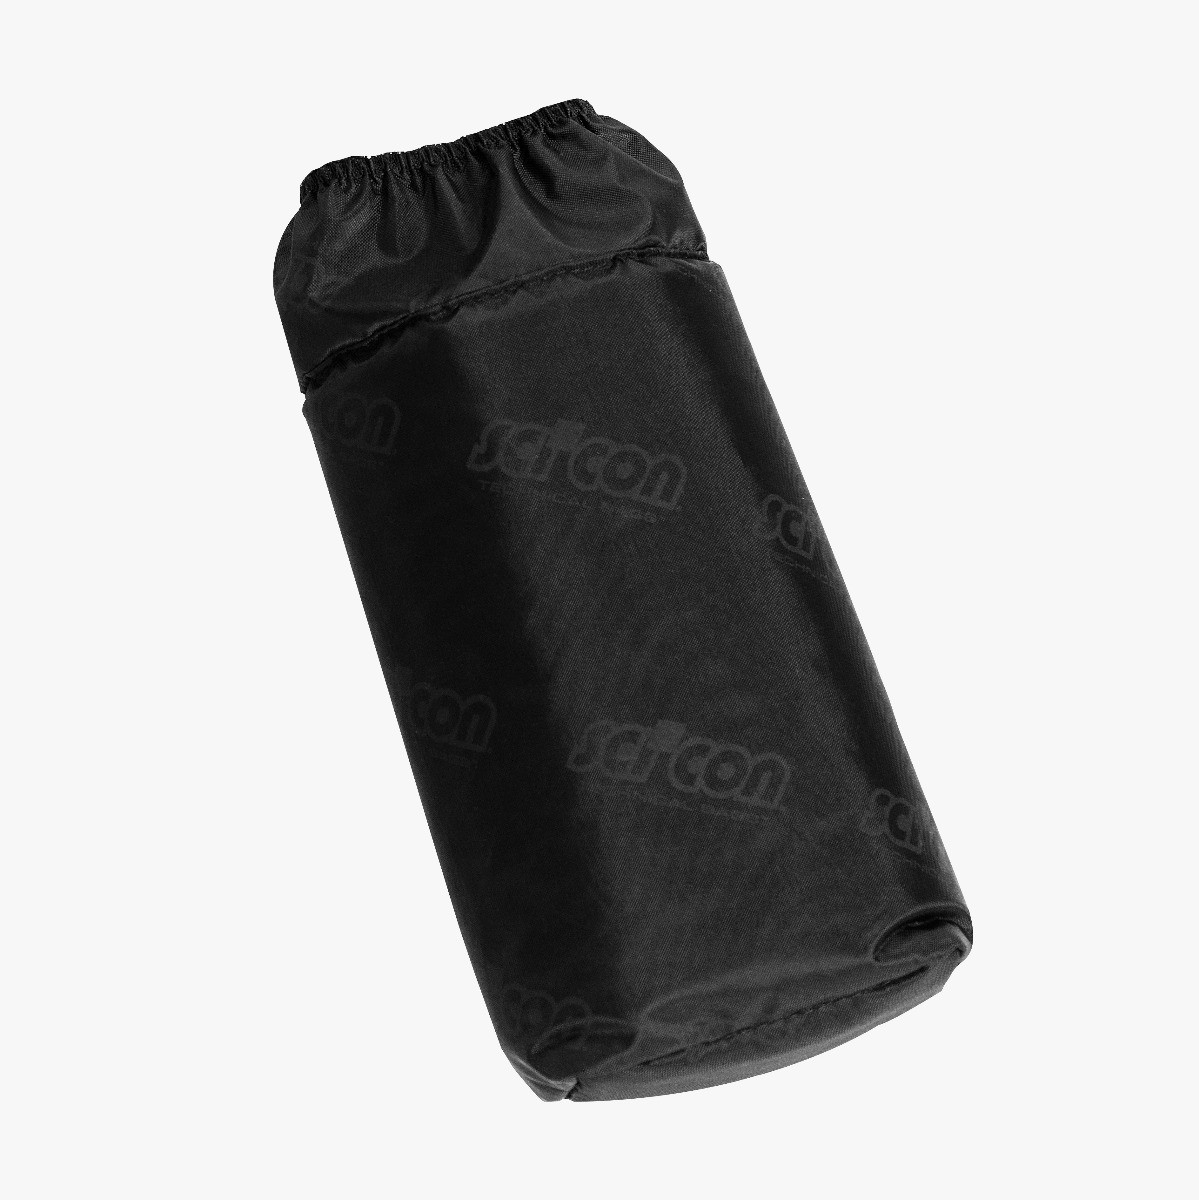 FRONT FORK PROTECTION PAD